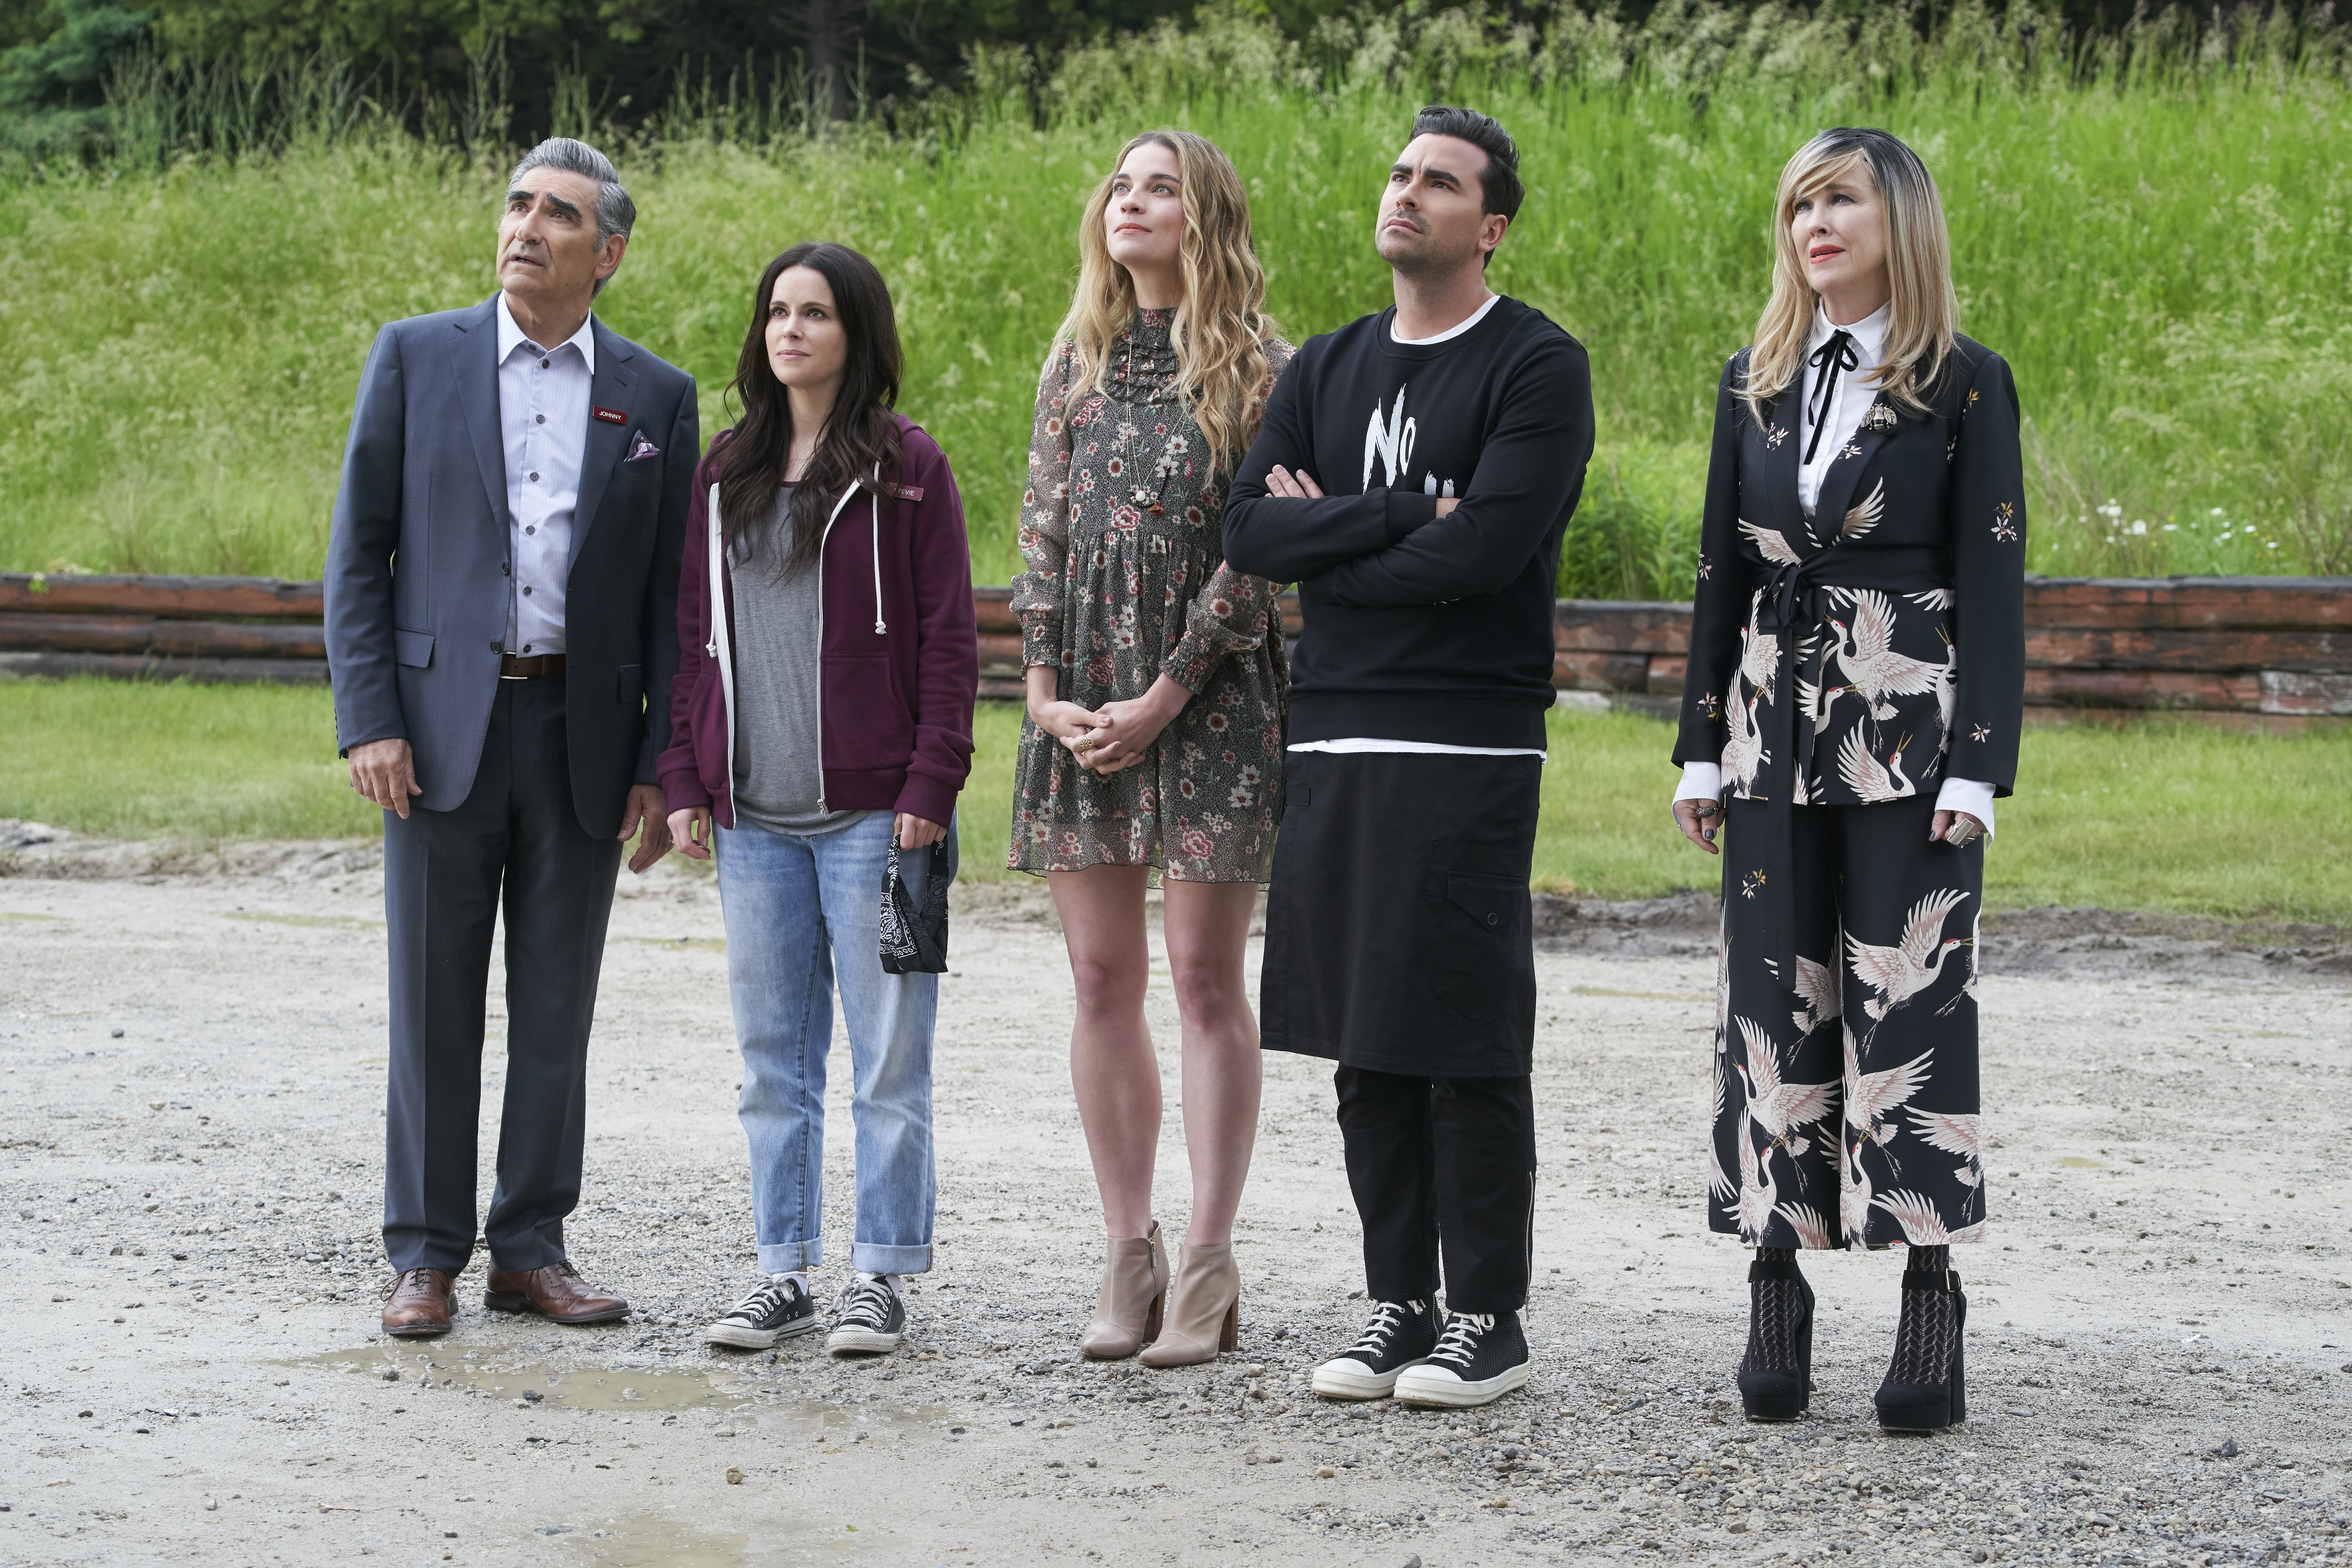 Five characters from Schitt&#x27;s Creek standing together, dressed in their distinctive styles, outdoors